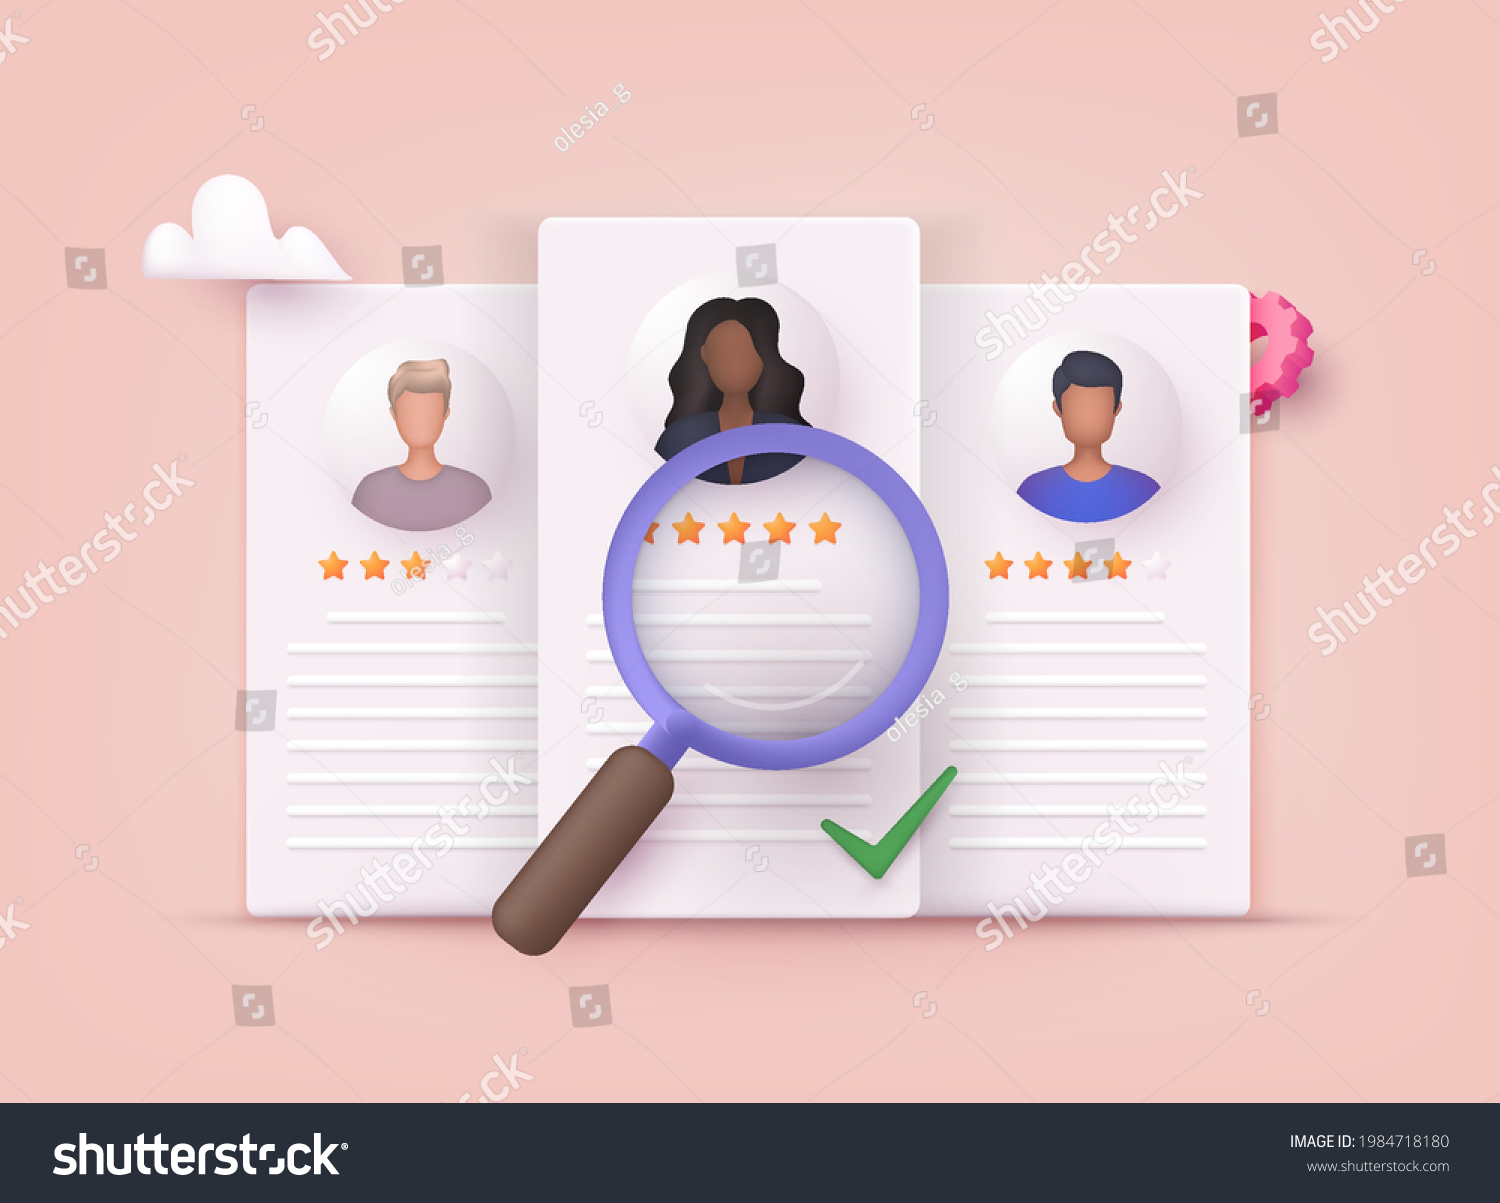 SVG of Human resource management and hiring concept. Job interview, recruitment agency vector illustration. 3D Vector Illustrations. svg